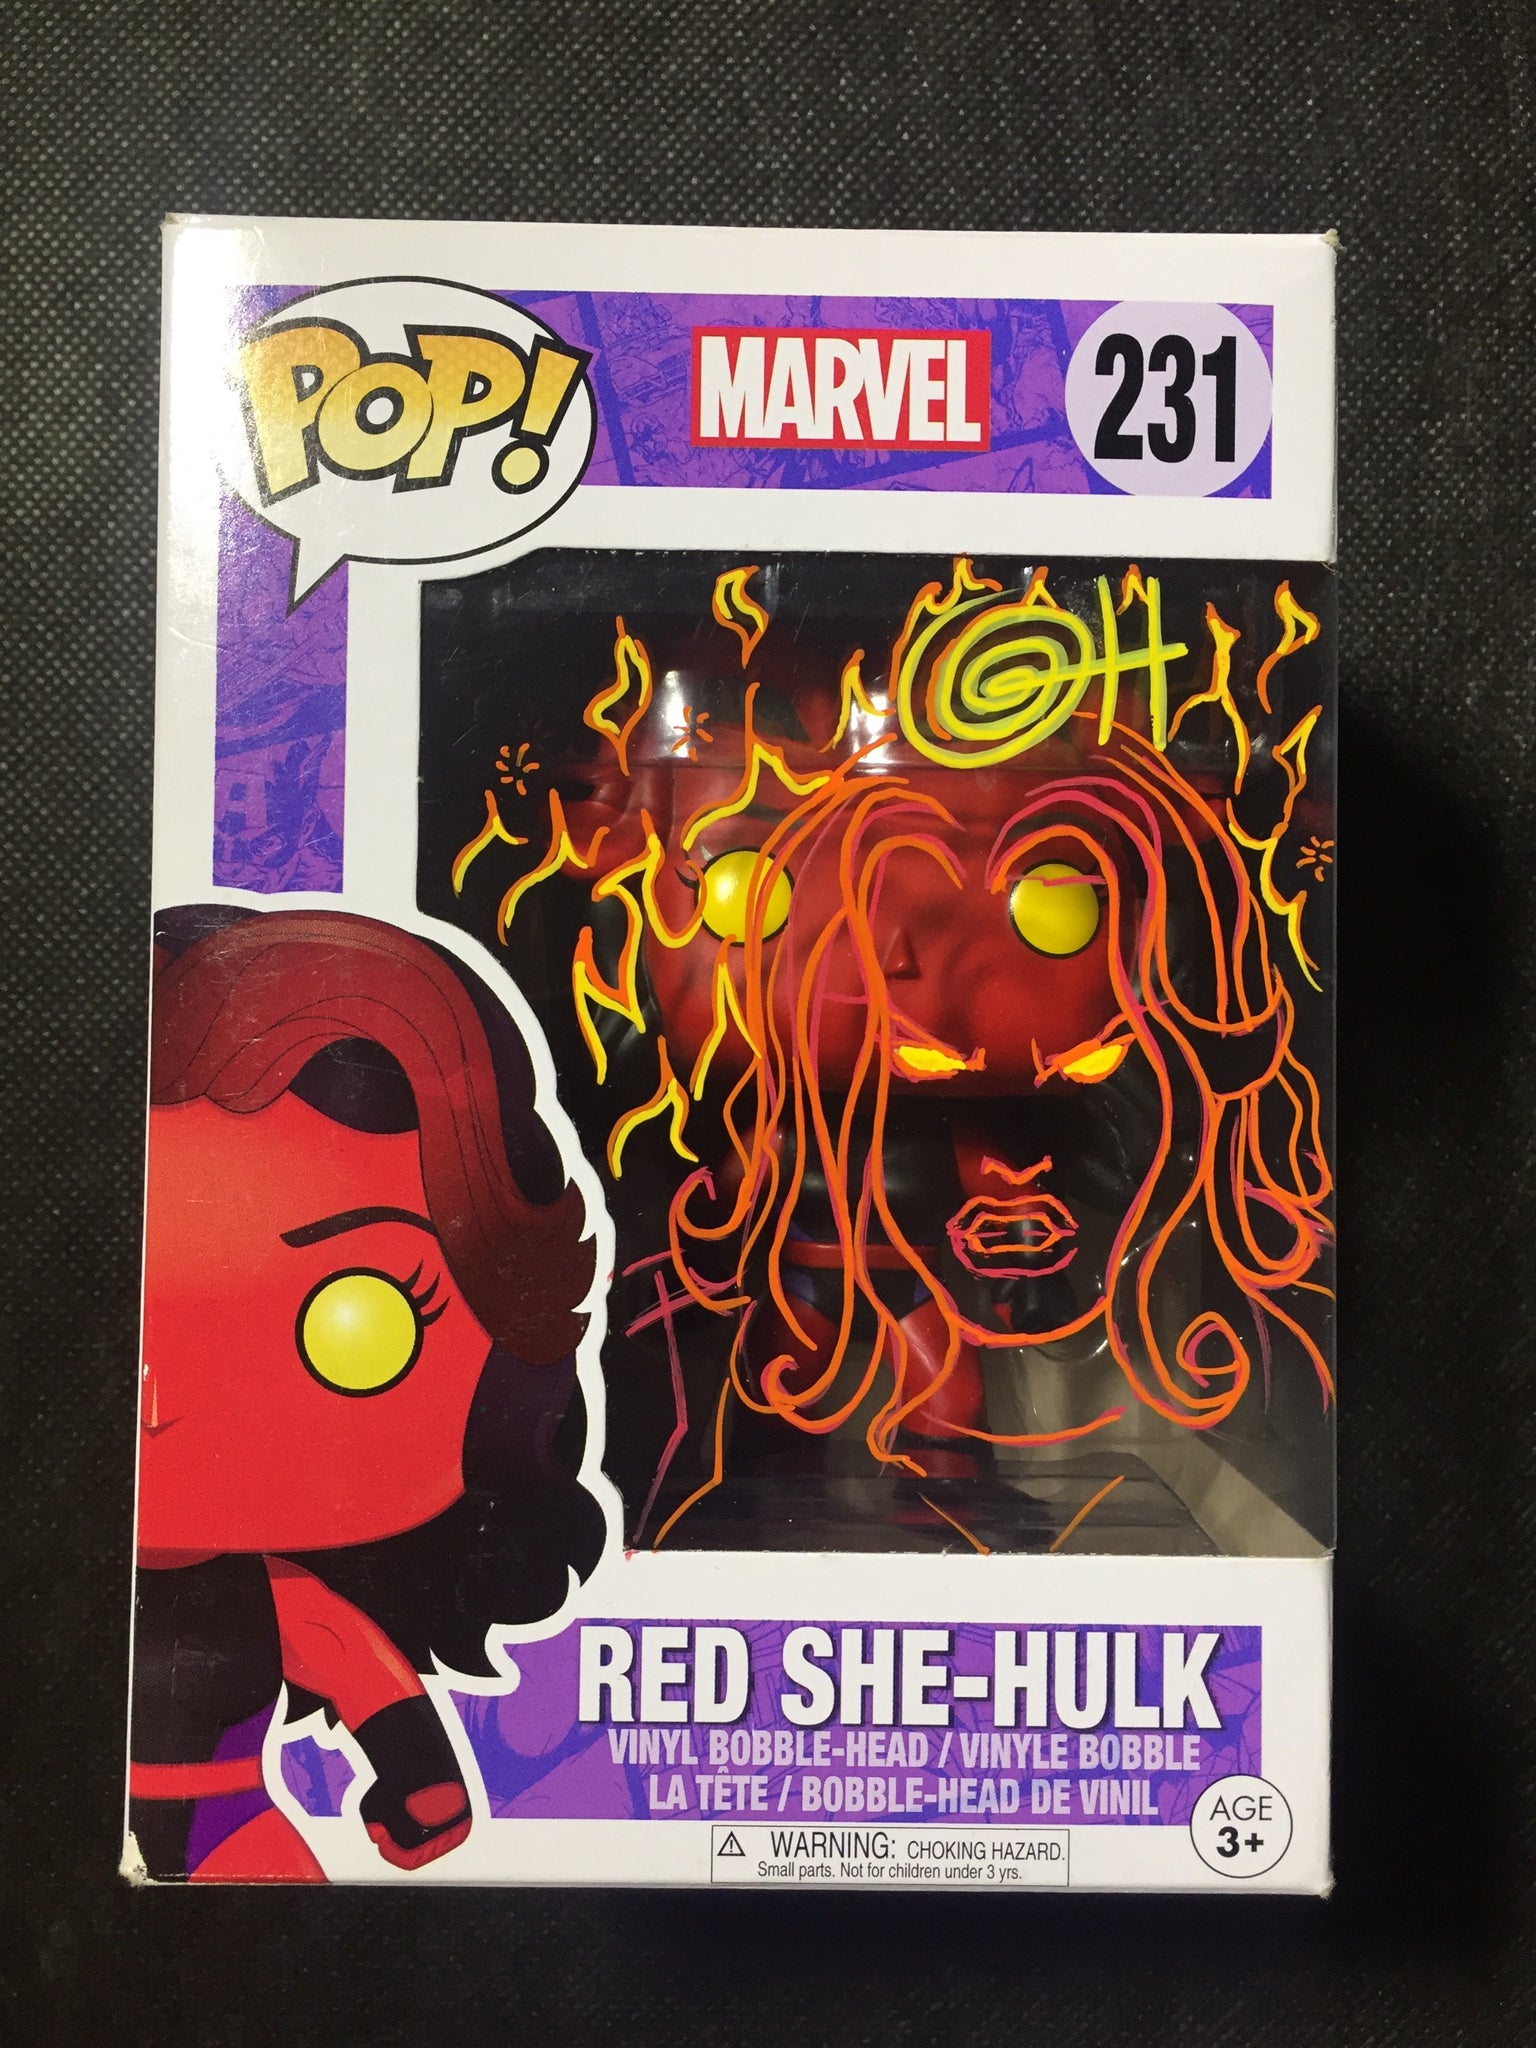 Red She-Hulk PoP! Remarked with Red She-Hulk & Flames.